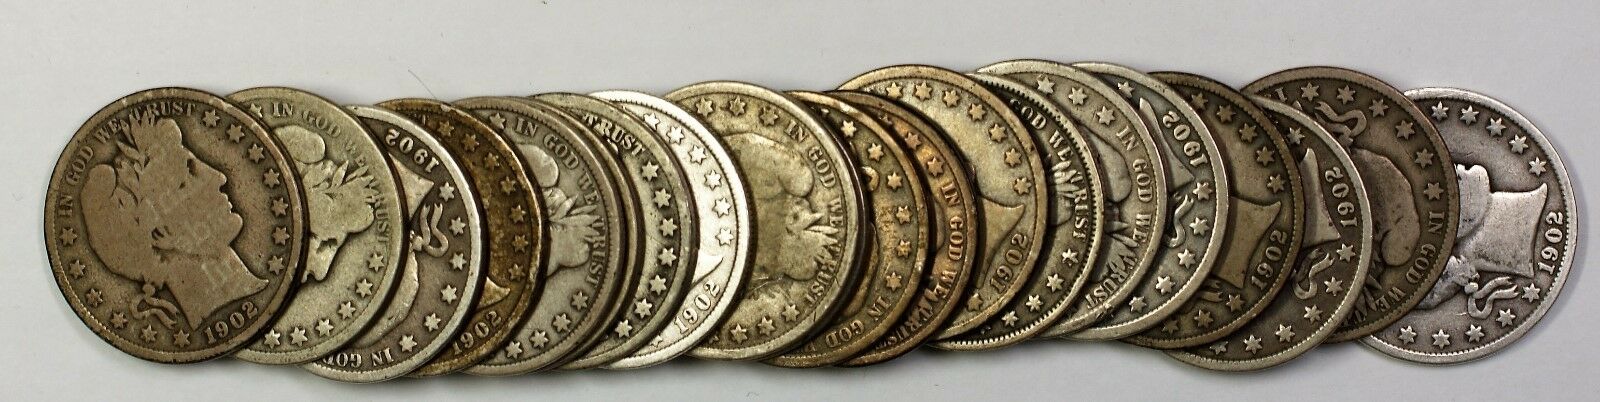 1907-D Barber Half Dollar 50c Roll 20 Circulated 90% Old Silver Coins Lot